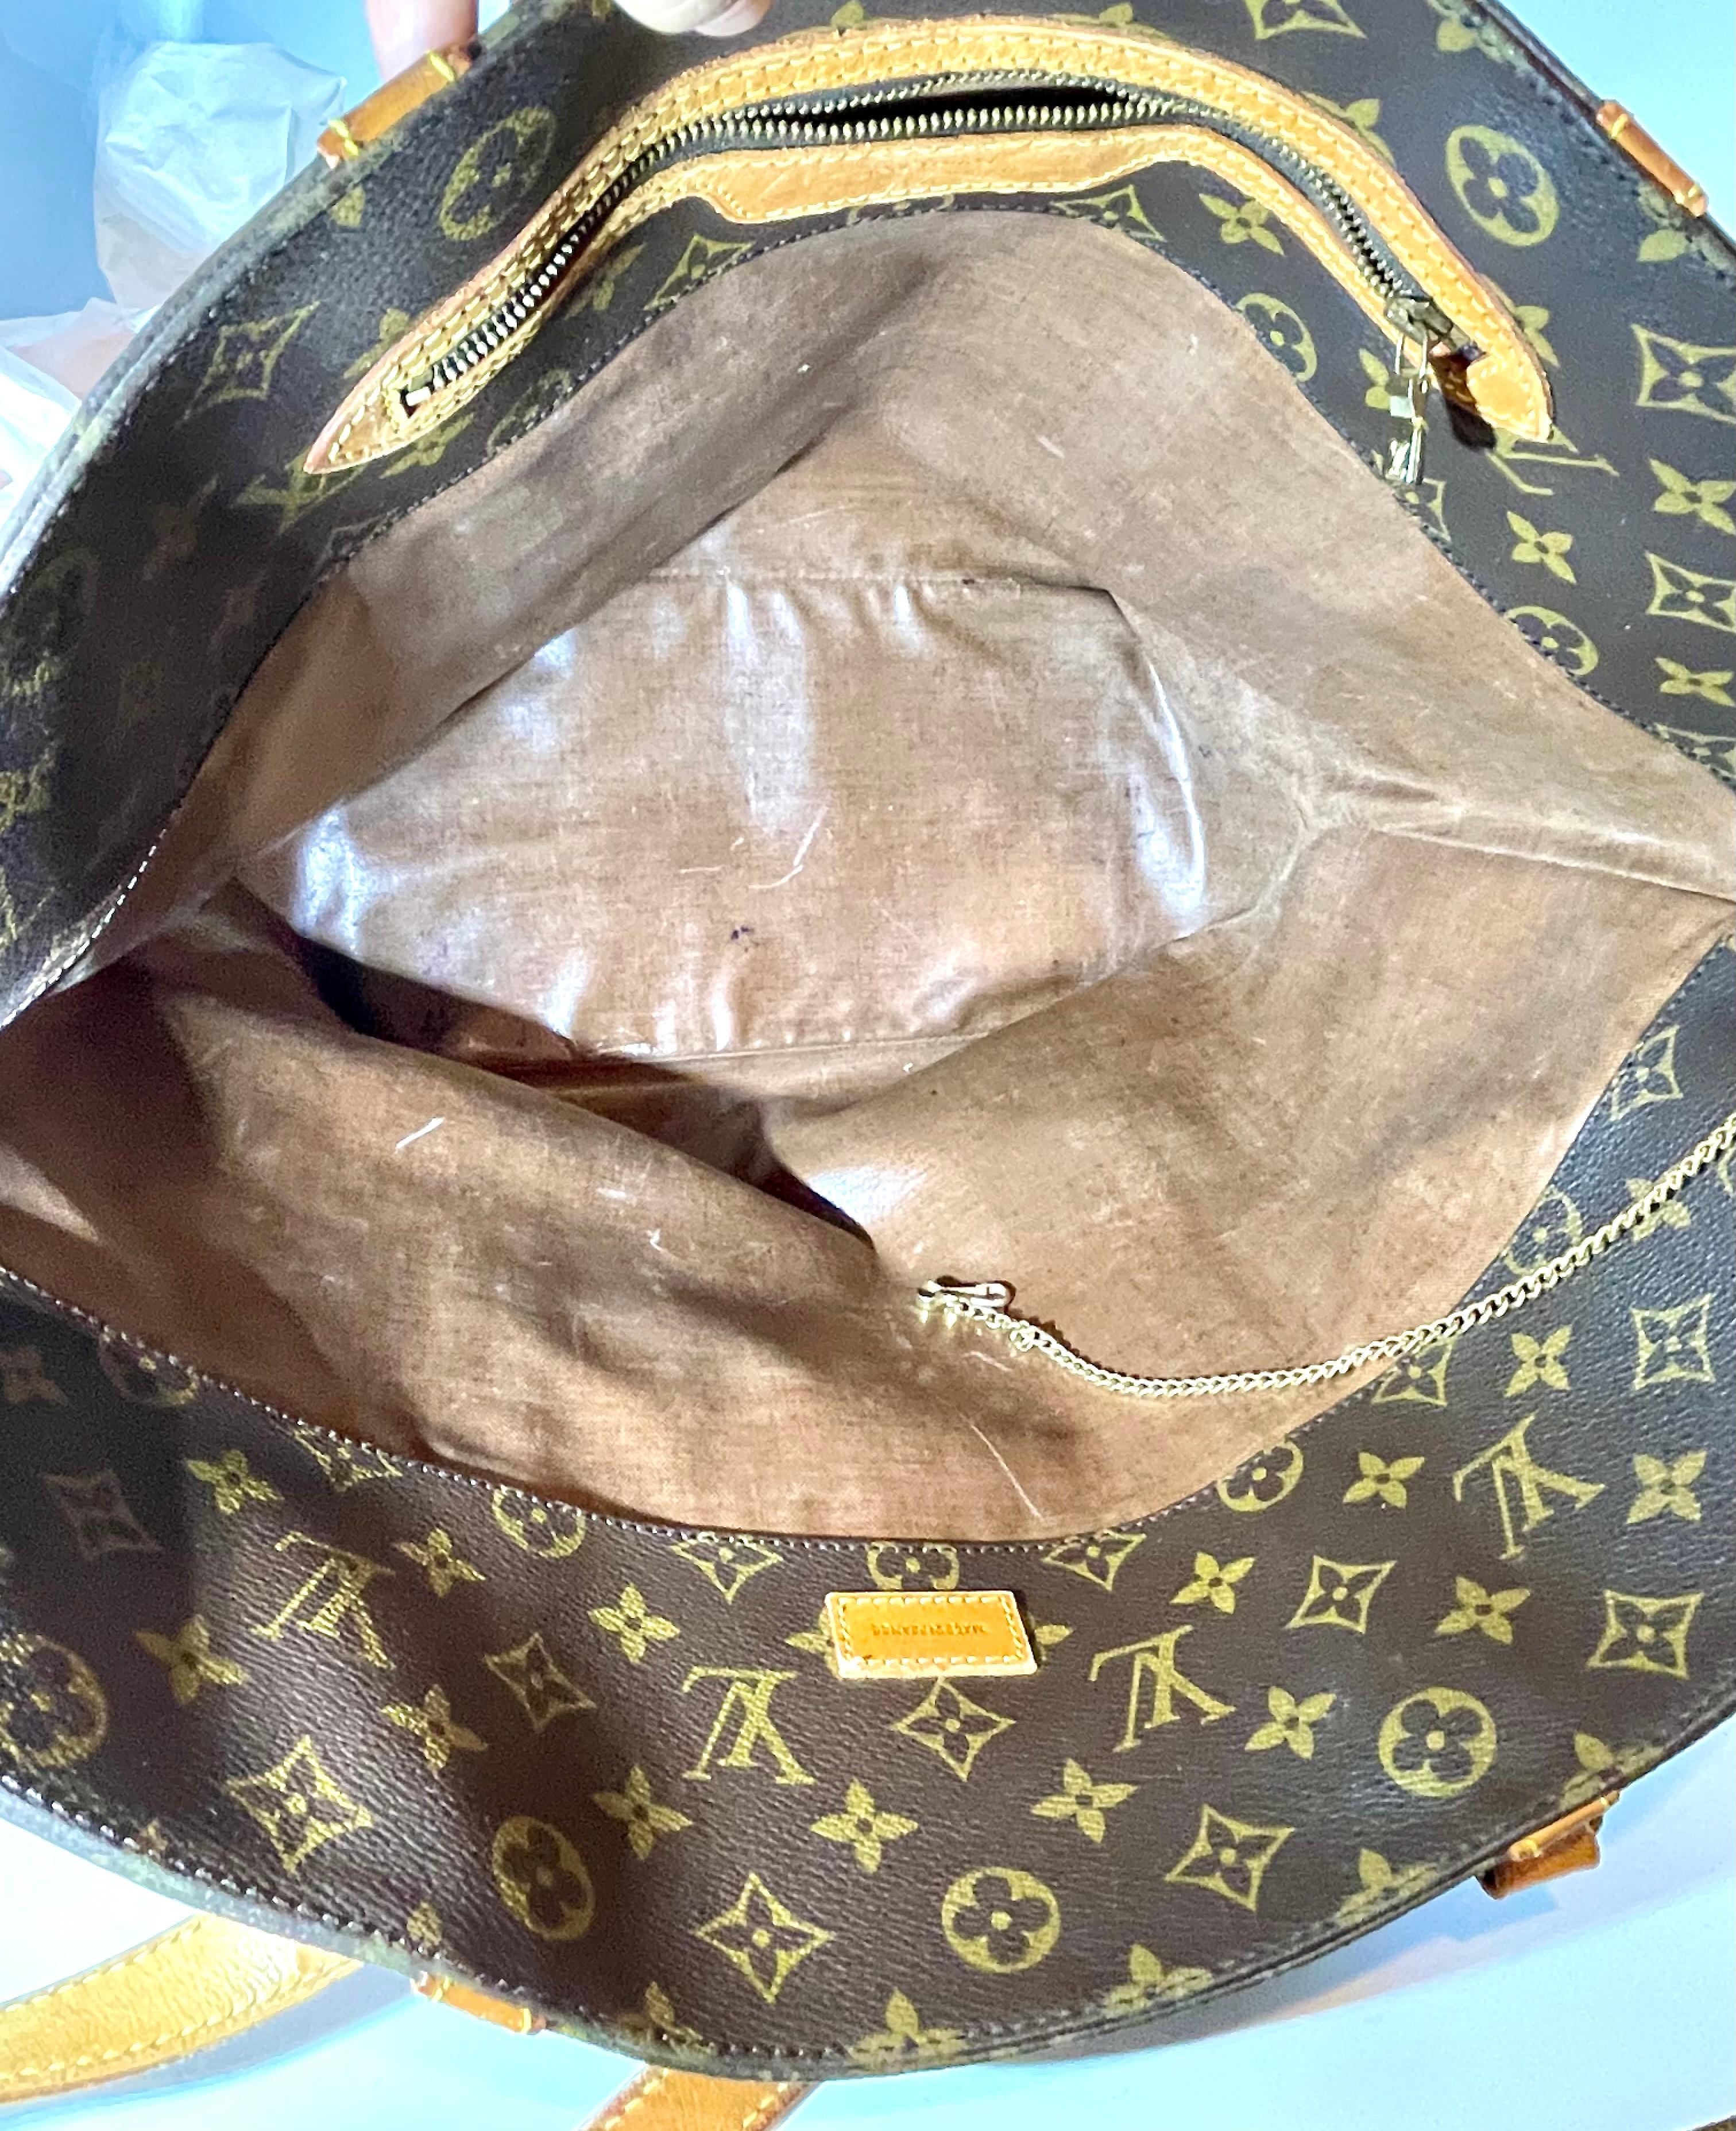 LOUIS VUITTON Vintage Monogram Sac Shopping Bag In Good Condition For Sale In New York, NY